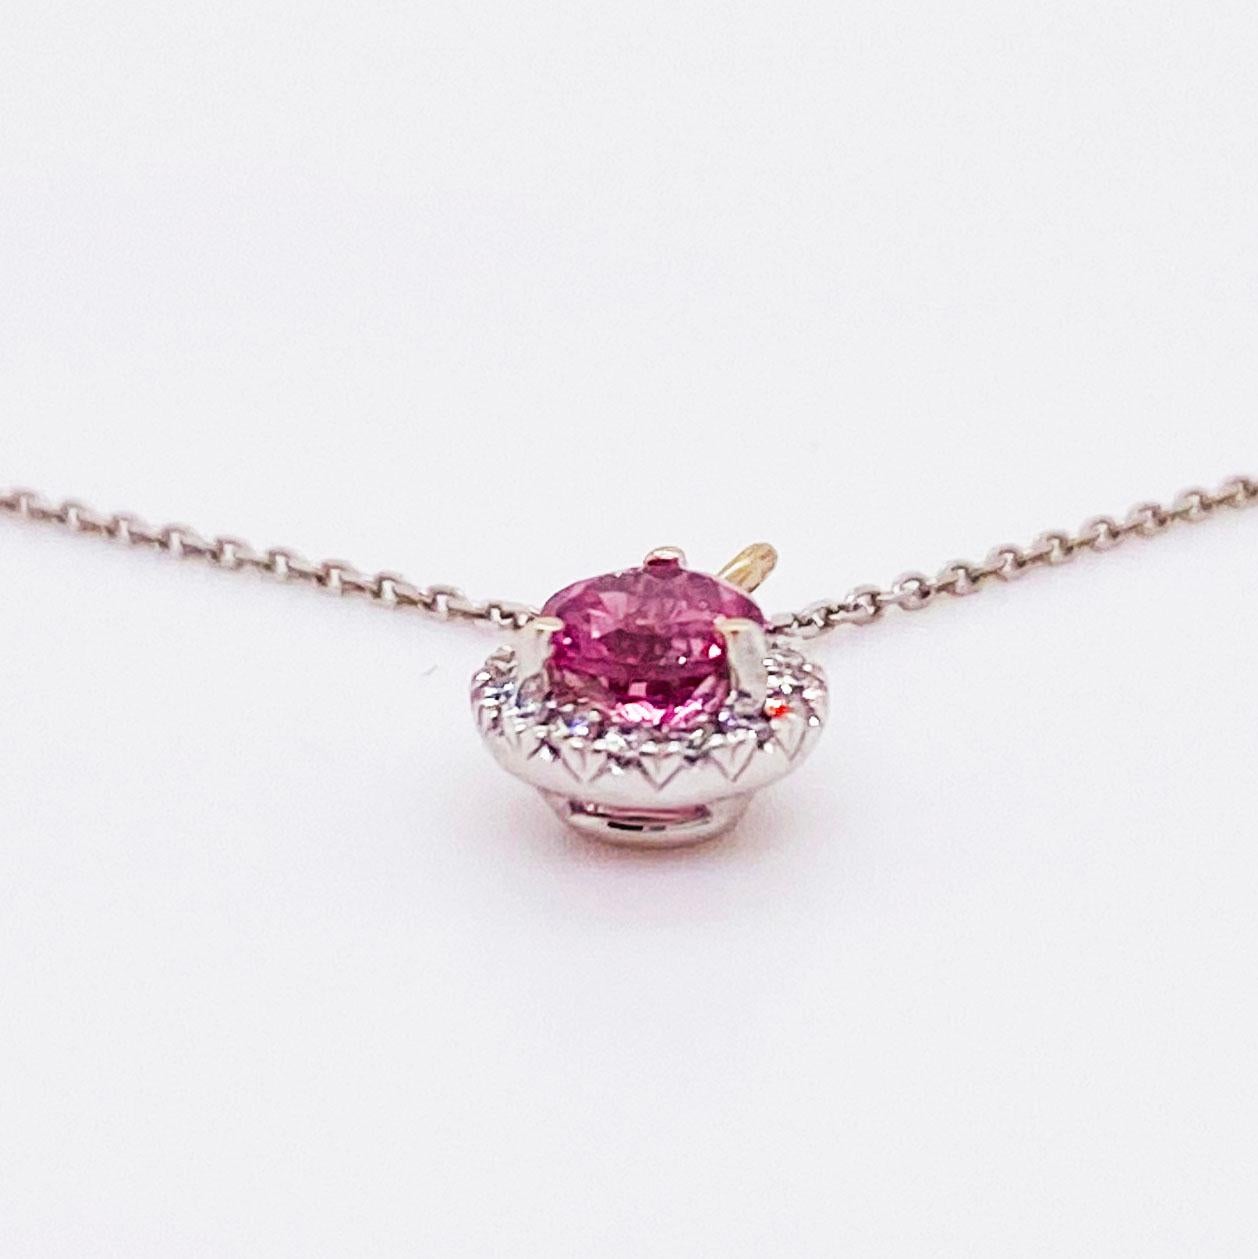 Adorable pink topaz and diamond halo pendant, the perfect gift for any November birthday or anniversary! This sweet pink topaz pendant has a round, genuine pink topaz gemstone set in four prongs with a bright white diamond halo around it. The 15